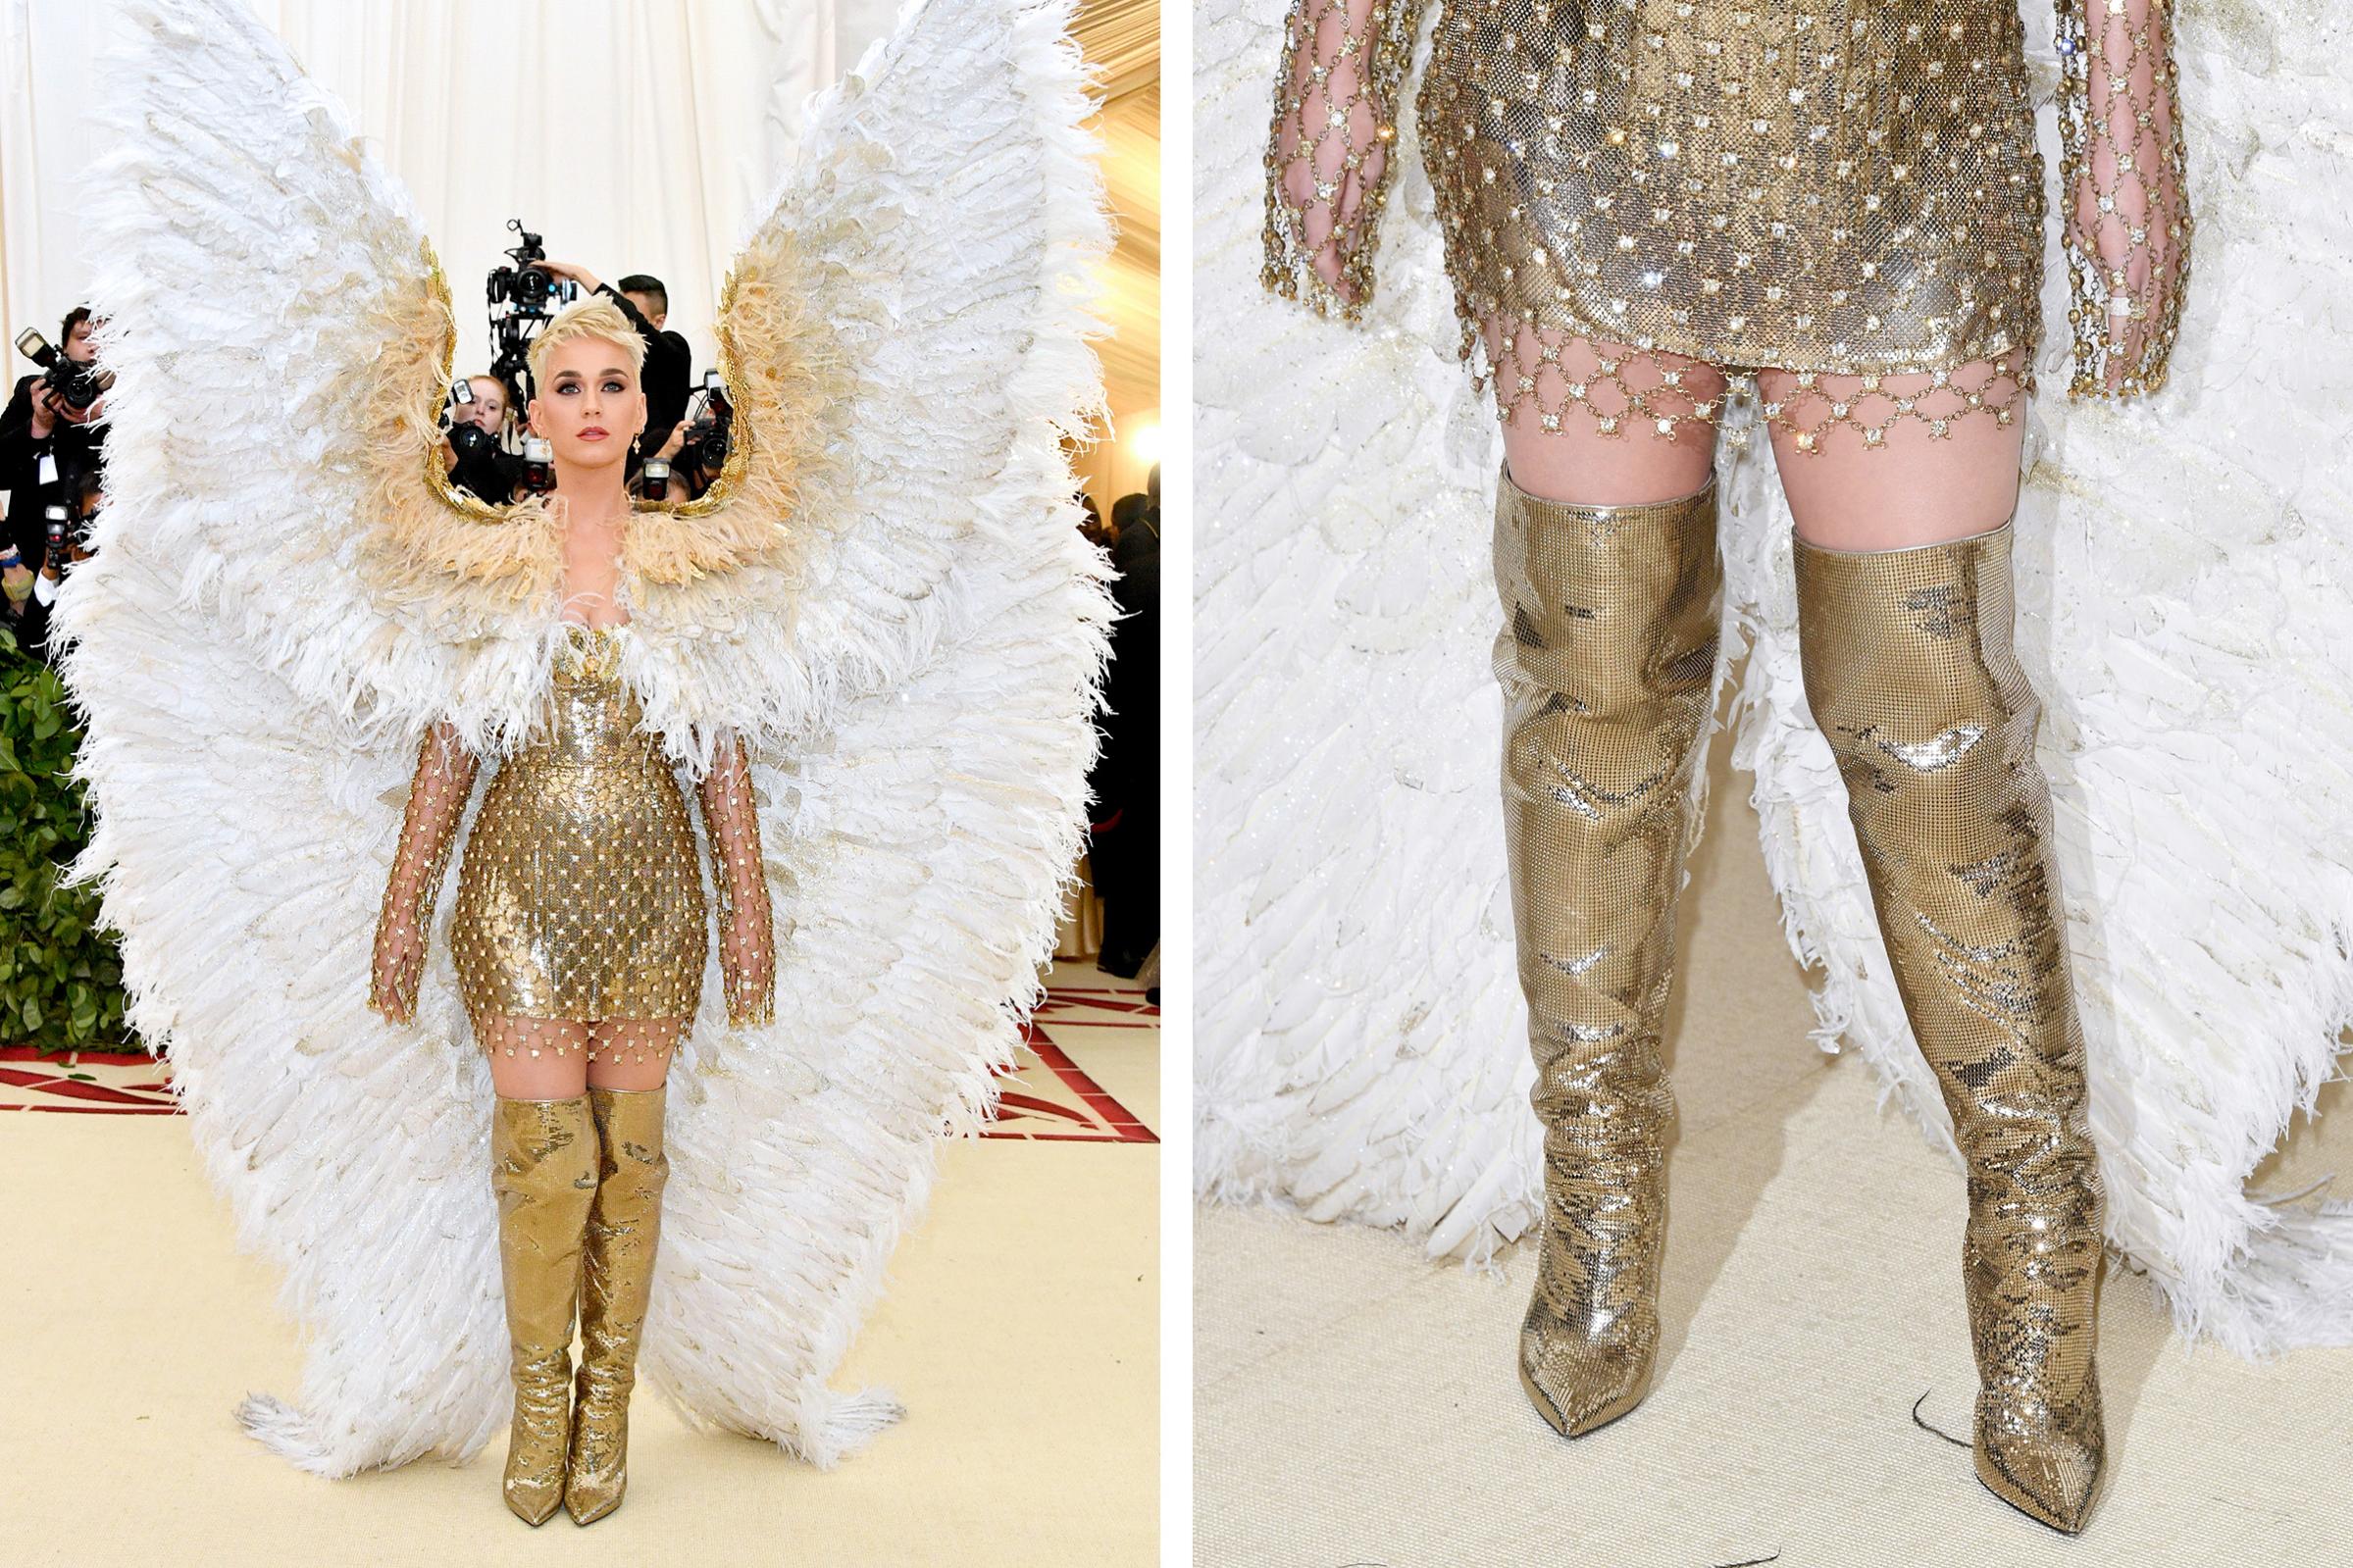 Katy Perry attends the 2018 Met Gala